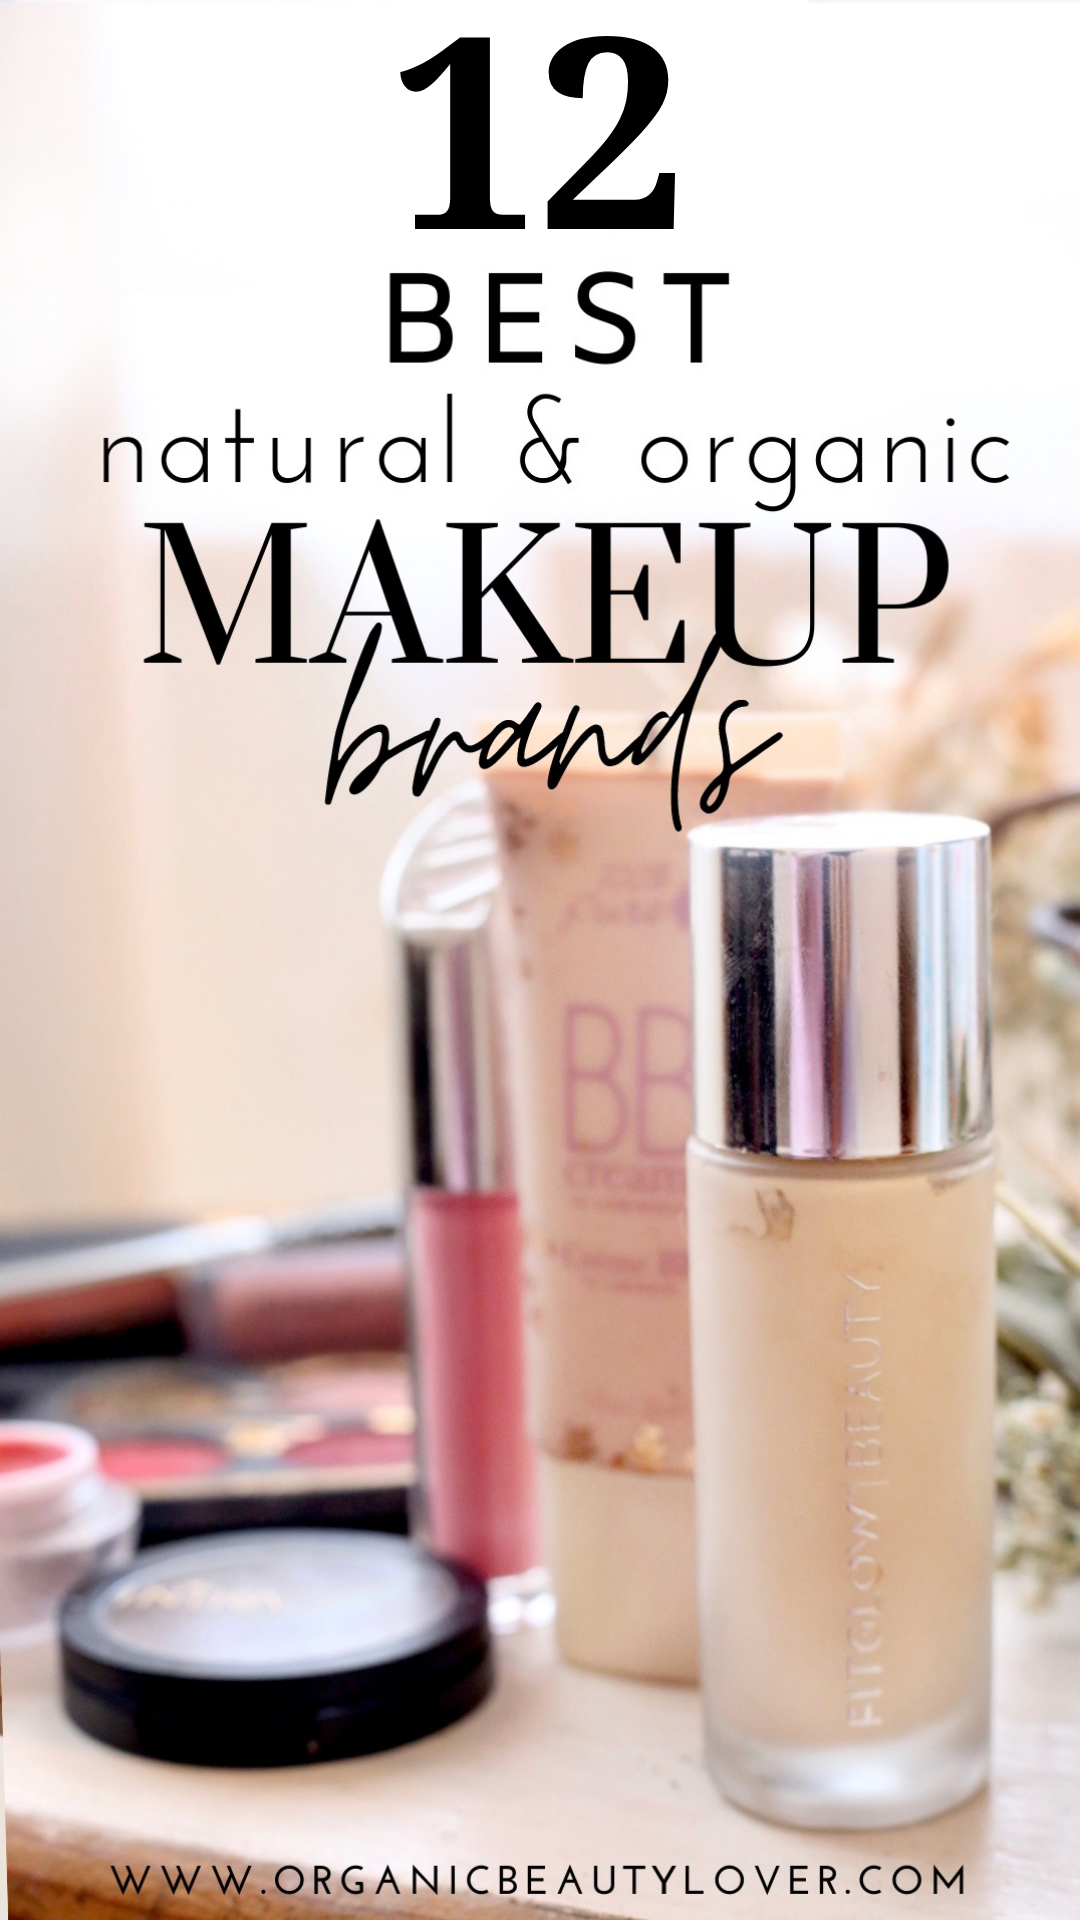 12 Best Natural Organic Makeup Brands Truly - Organic Beauty Lover